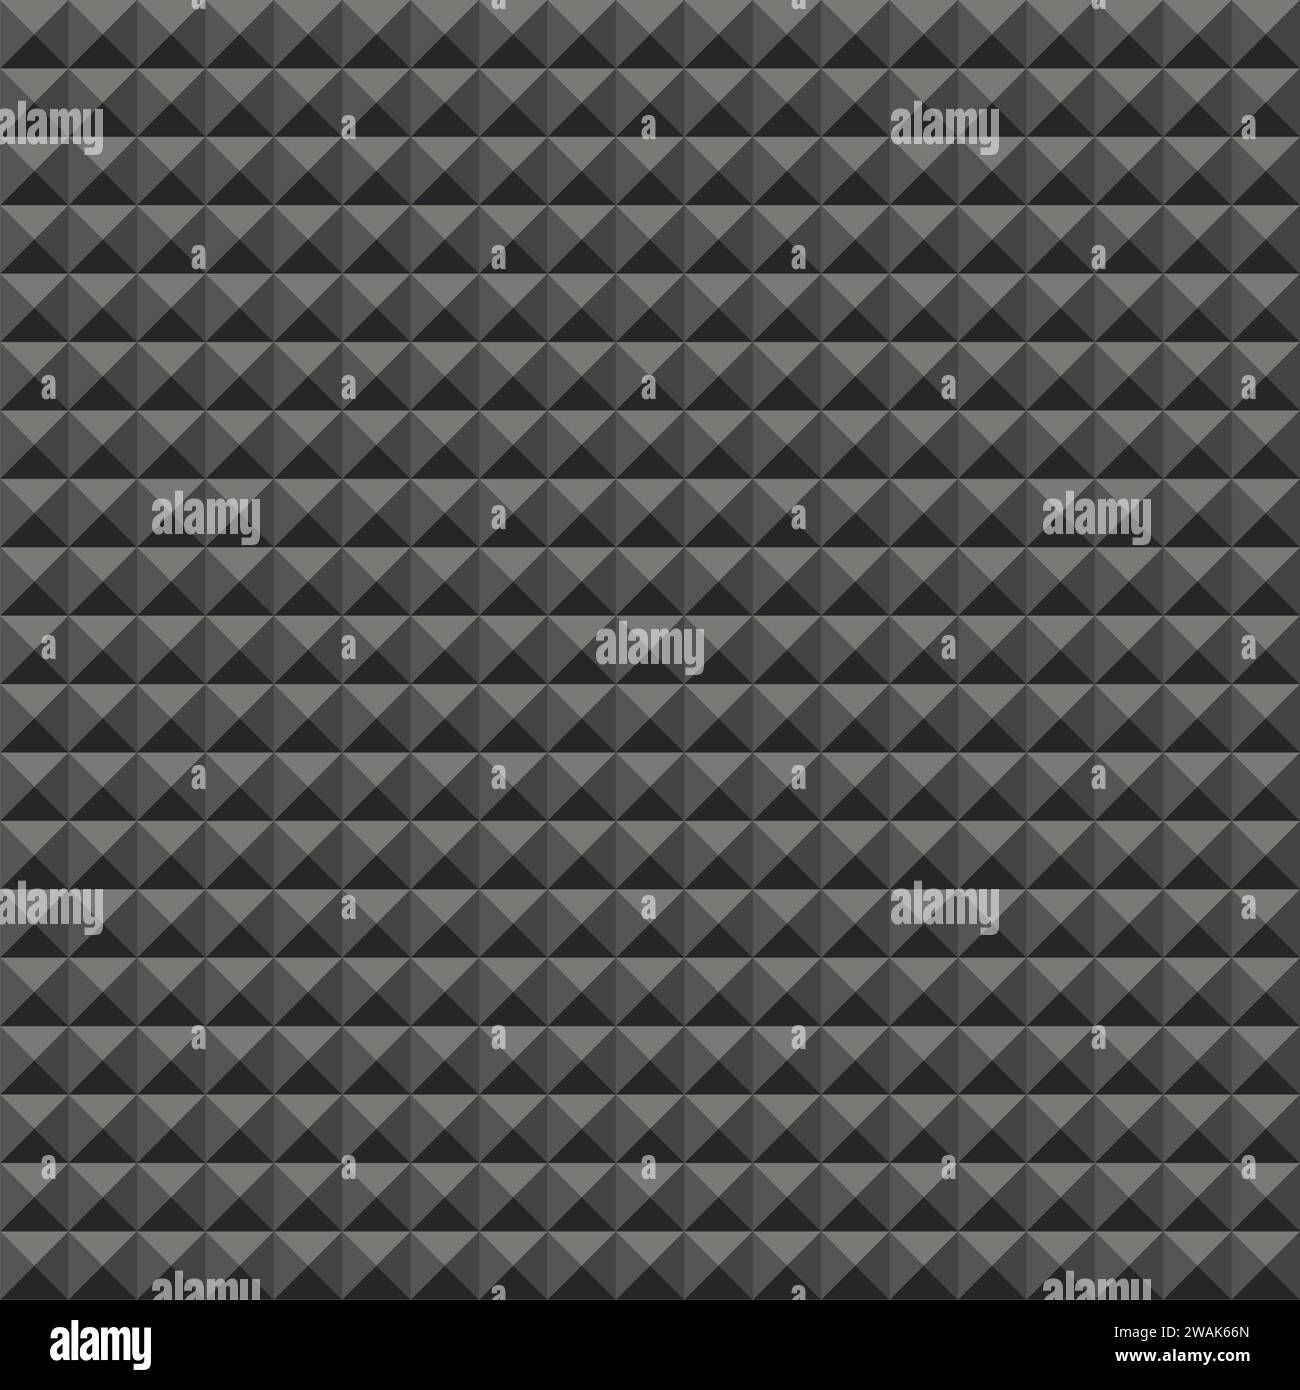 Acoustic foam rubber wall pattern, Dark seamless background with pyramid and triangle texture for sound studio recording, Vector illustration. Stock Vector